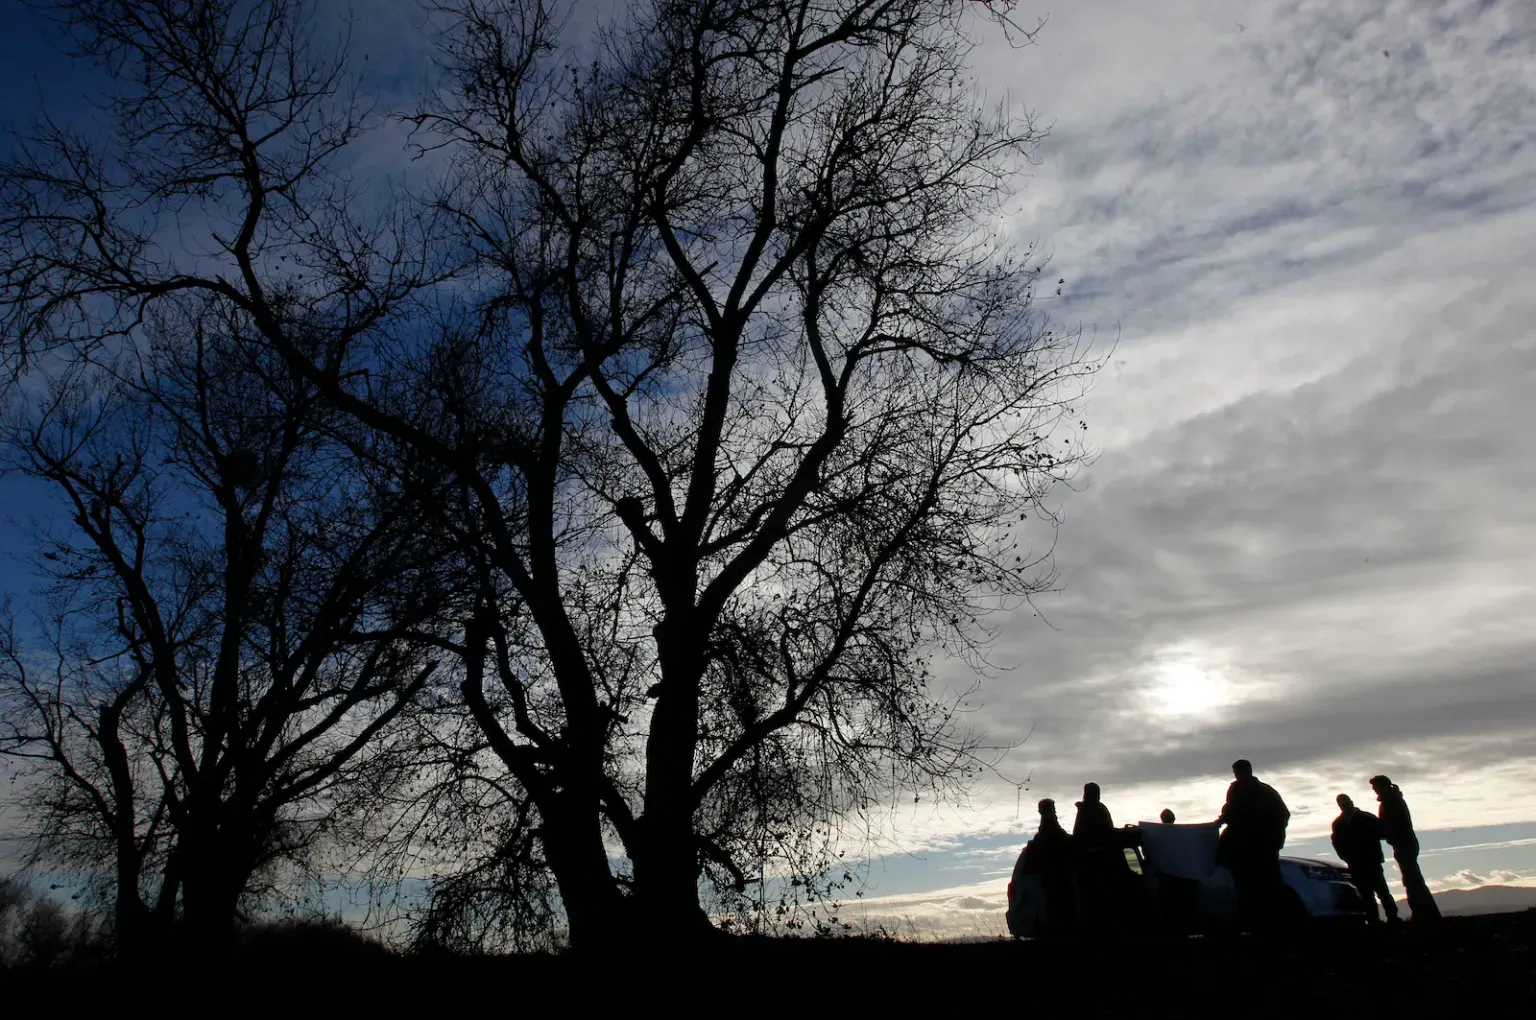 Trees and a group of people with a vehicle in silhouette against a bright cloudy sky